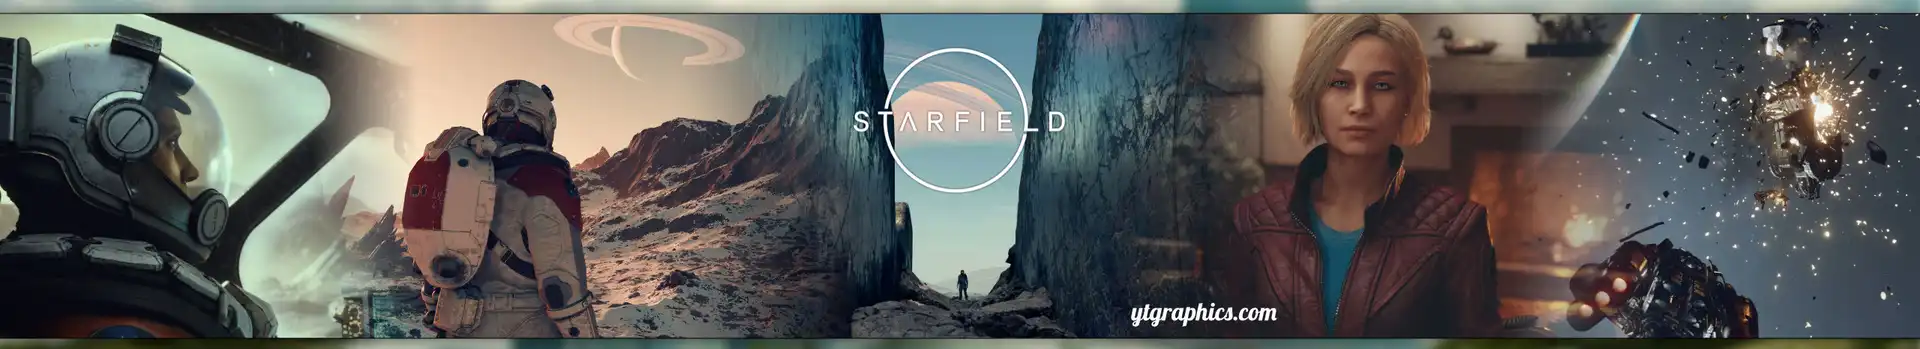 Starfield preview